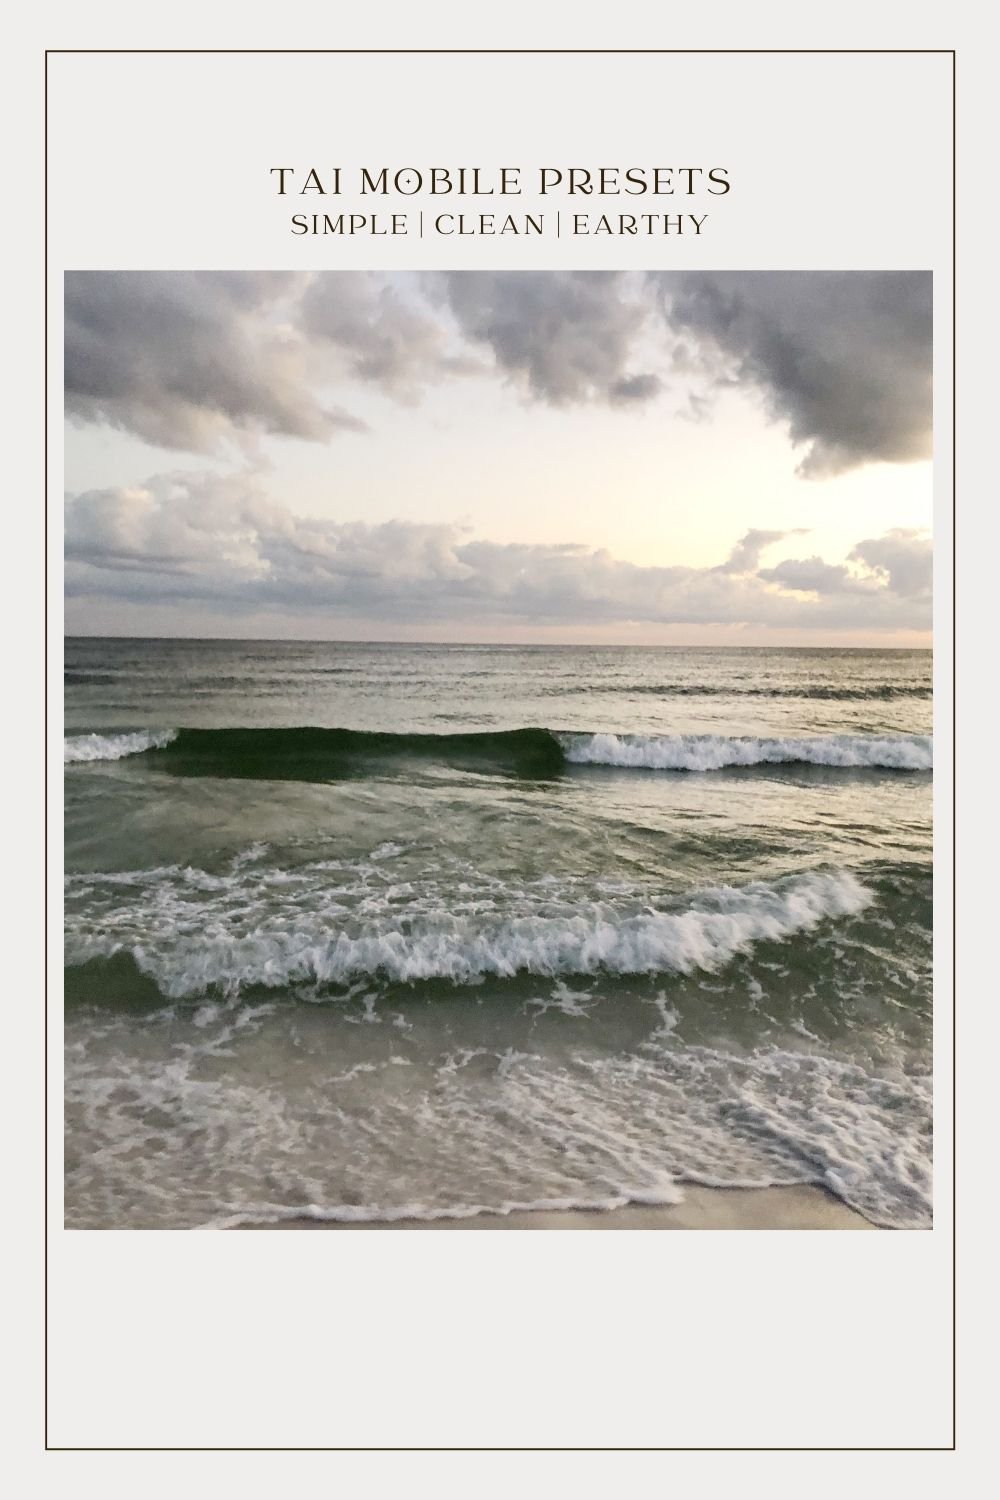 edited photo of florida beach and waves